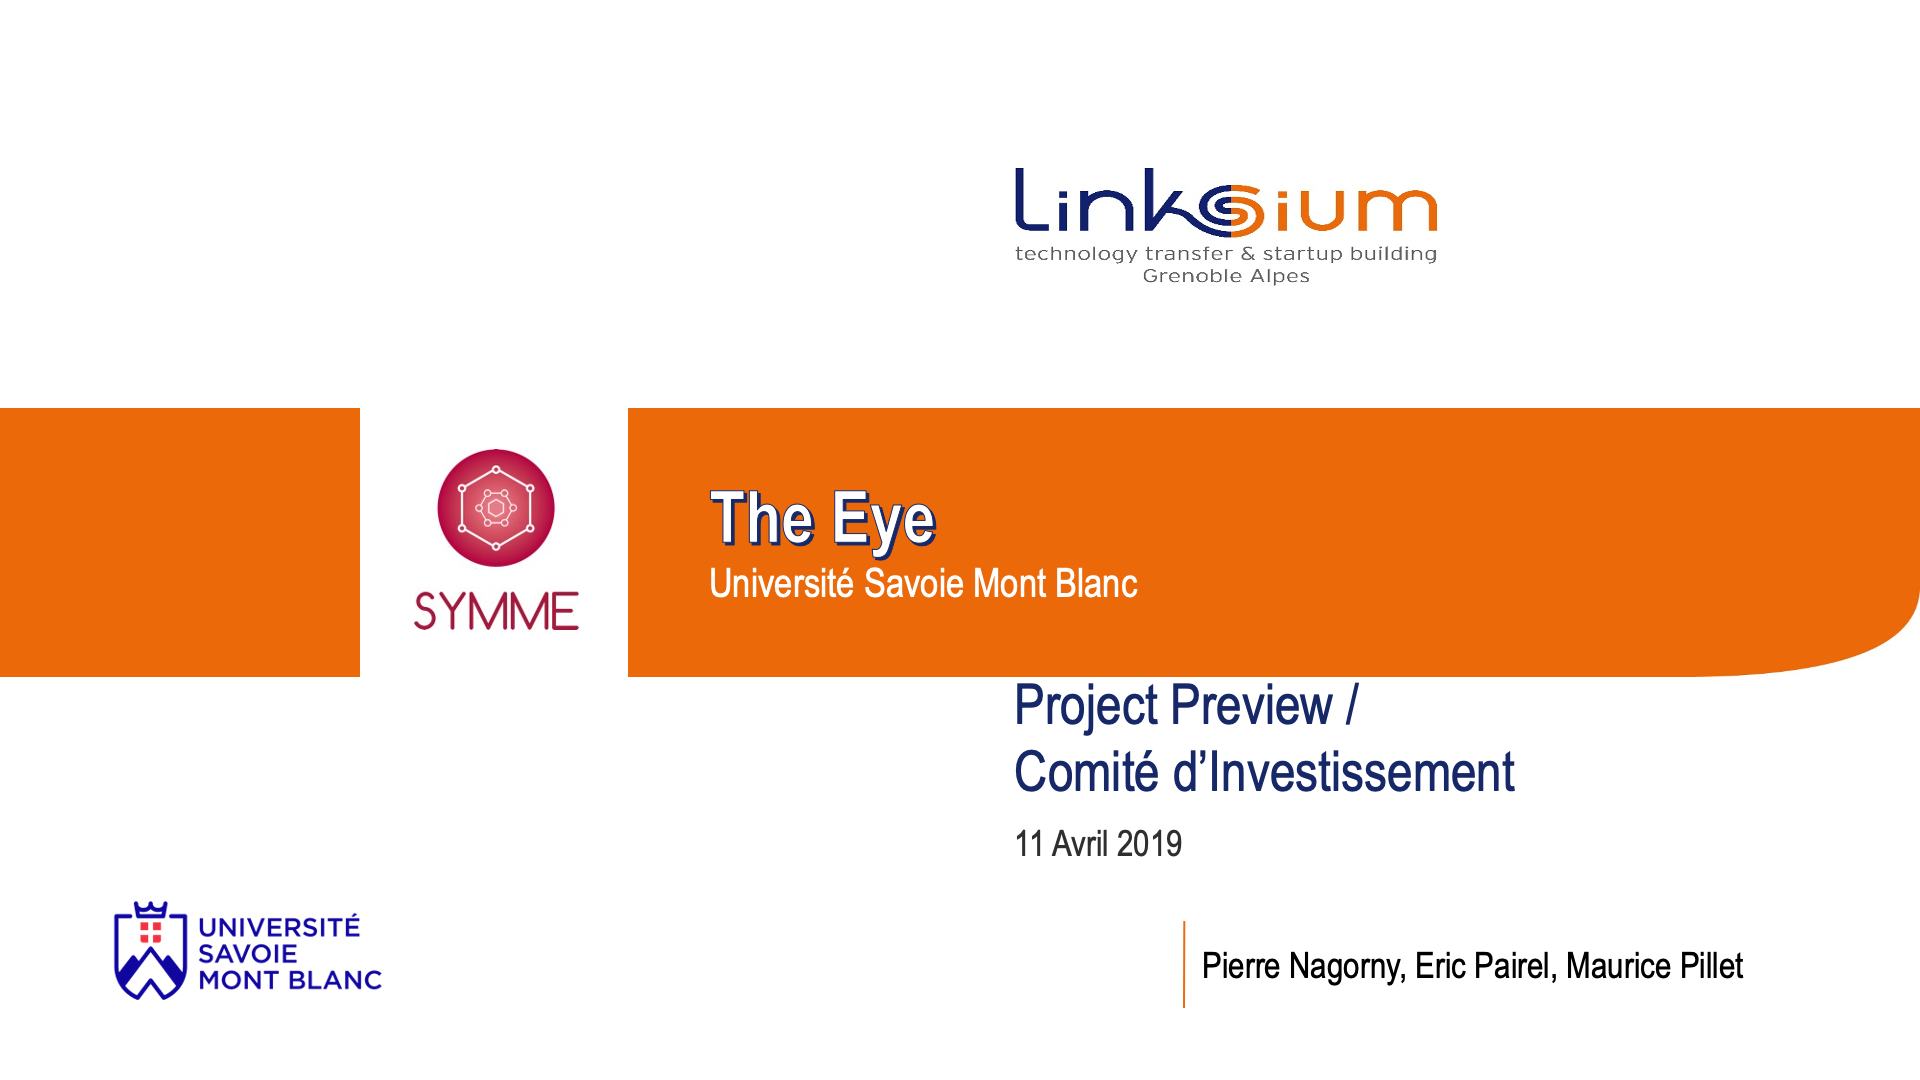 Slide of TheEye project review at Linksium